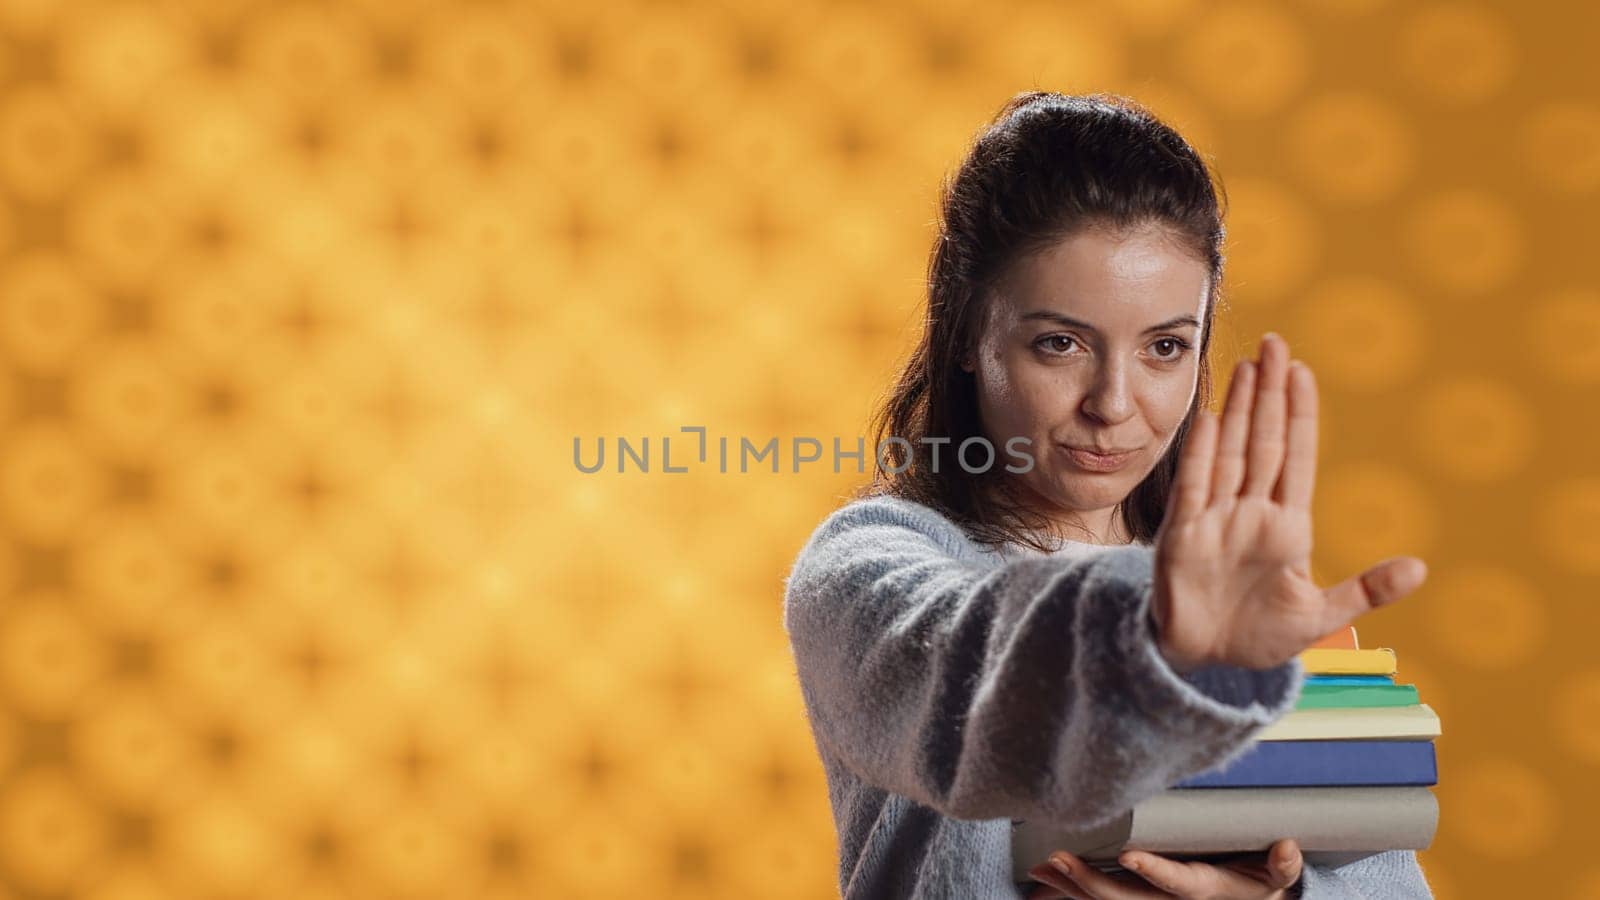 Portrait of stern woman holding stack of books doing stop sign gesturing, studio background. Student with pile of textbooks in arms used for academic learning doing halt hand gesture, camera A